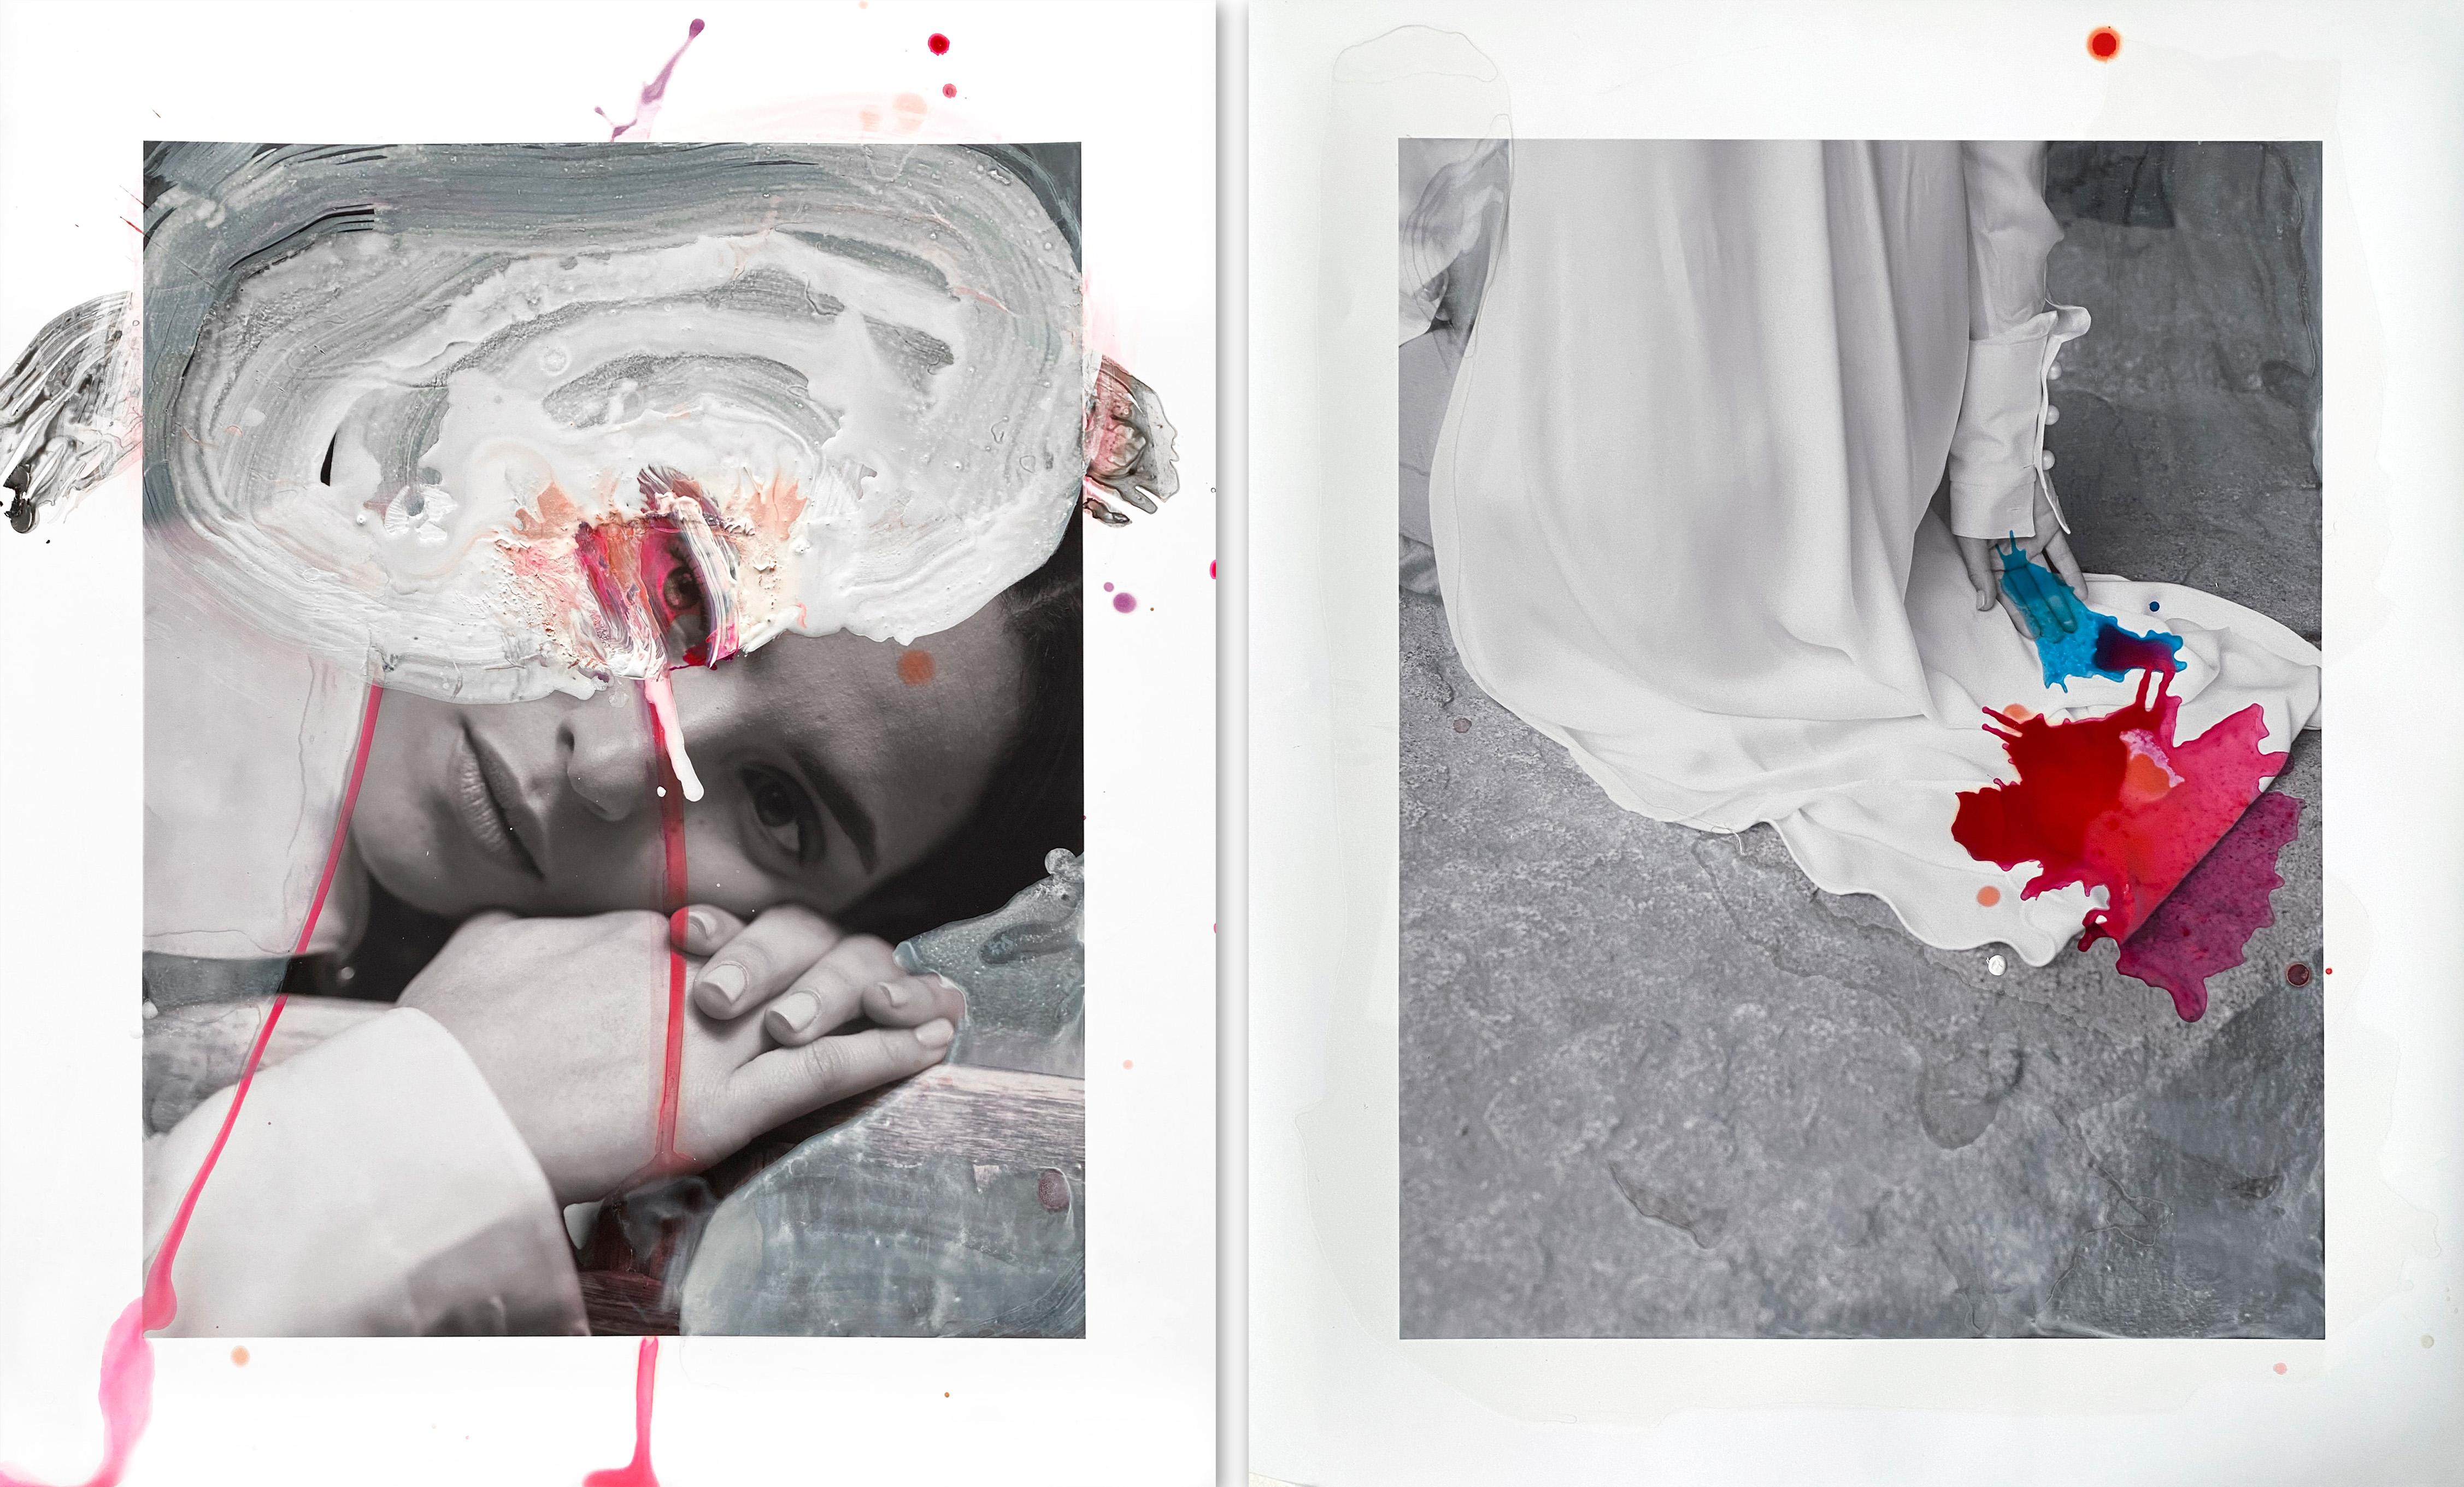 Hunter & Gatti Portrait Photograph - Tokyo and Ceremony II, Diptych Abstract mixed media portrait photograph